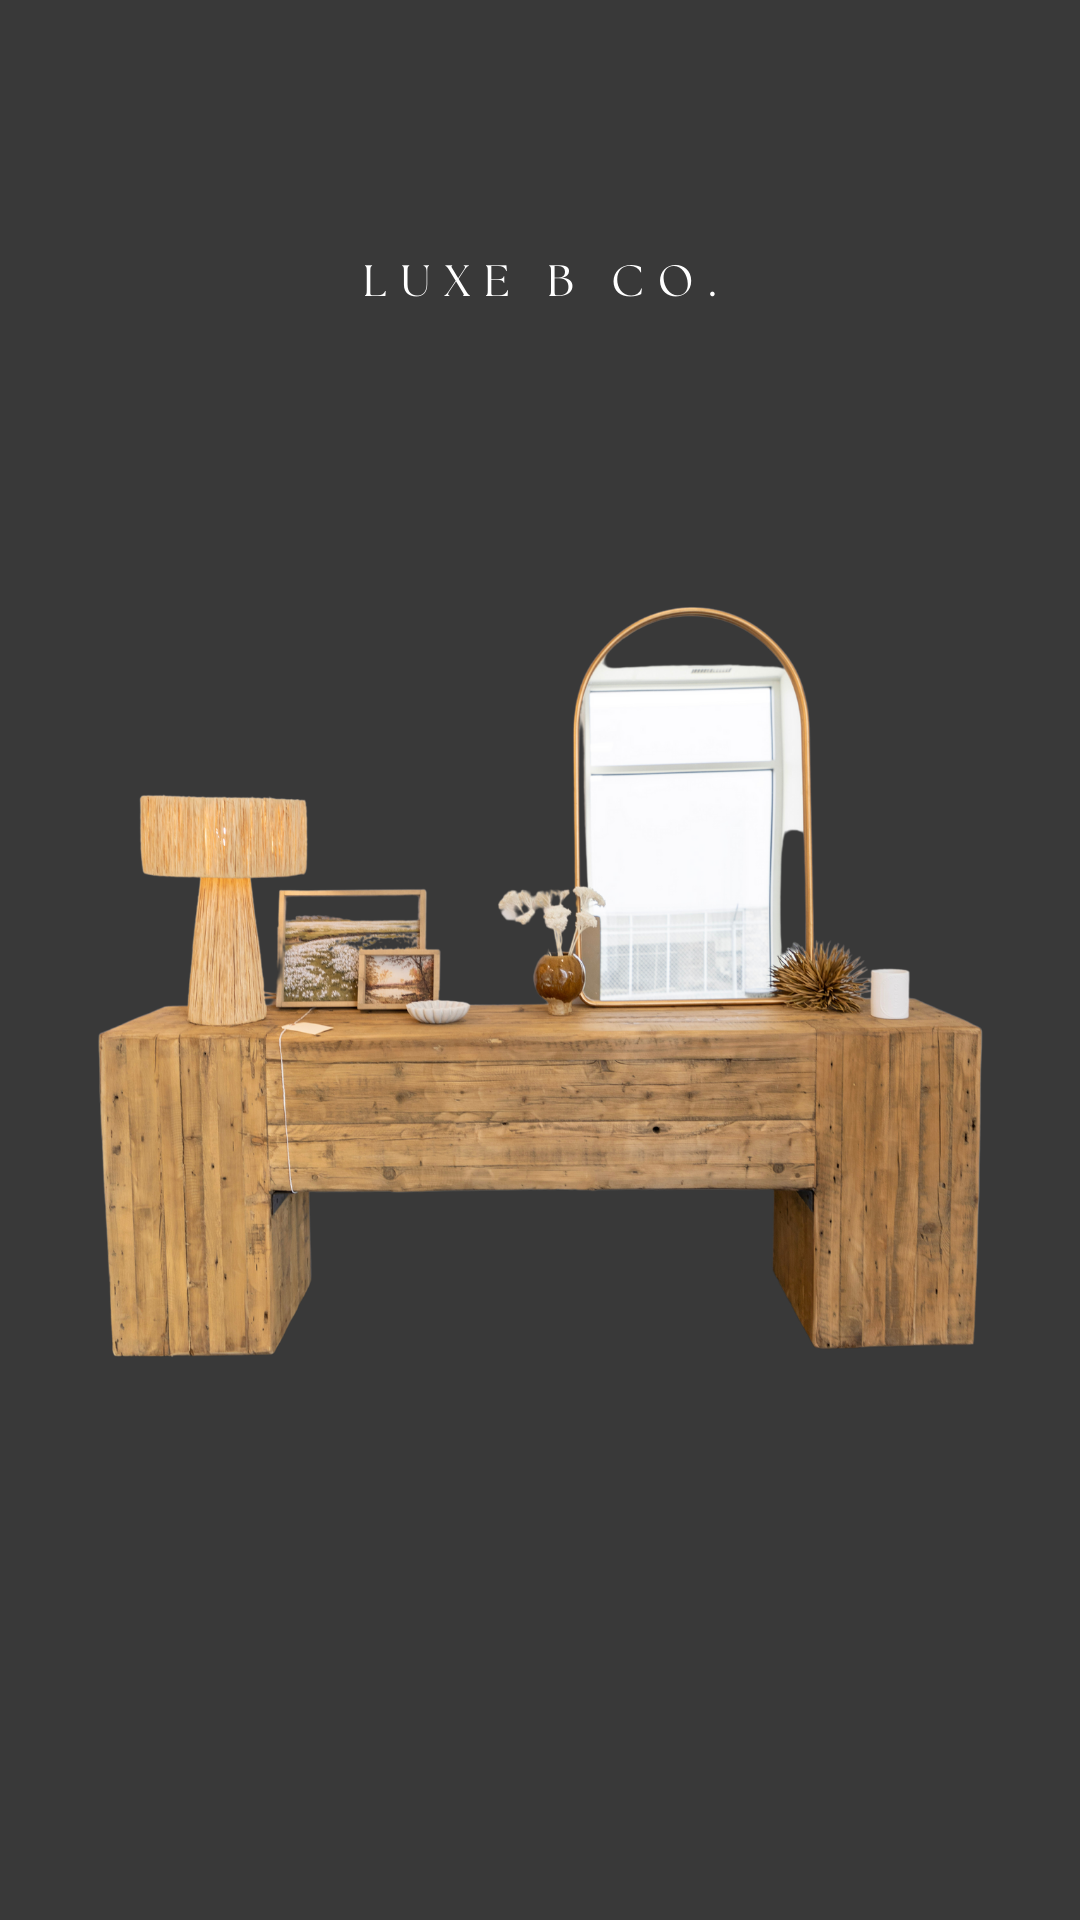 ENGLISH BEAM Elm Wood Console Table - Luxe B Co